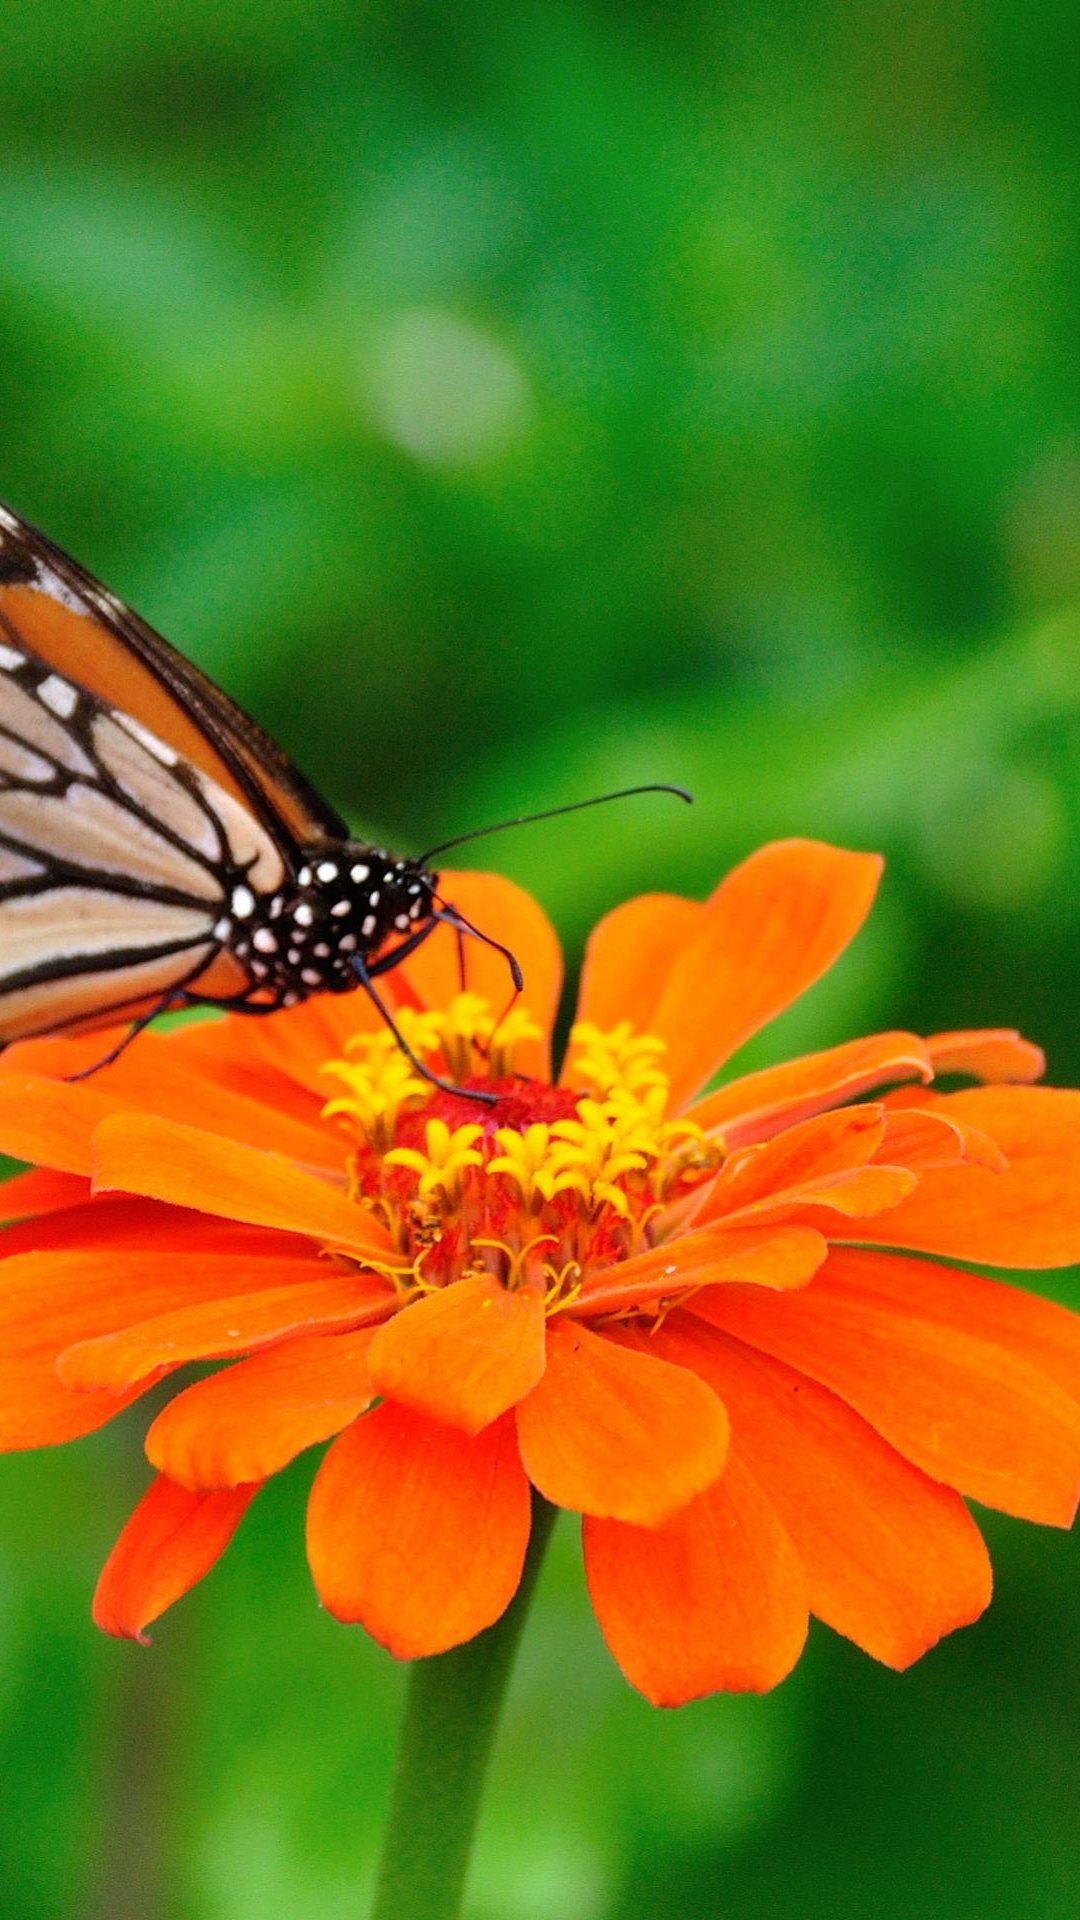 Butterfly wallpaper download for android pc